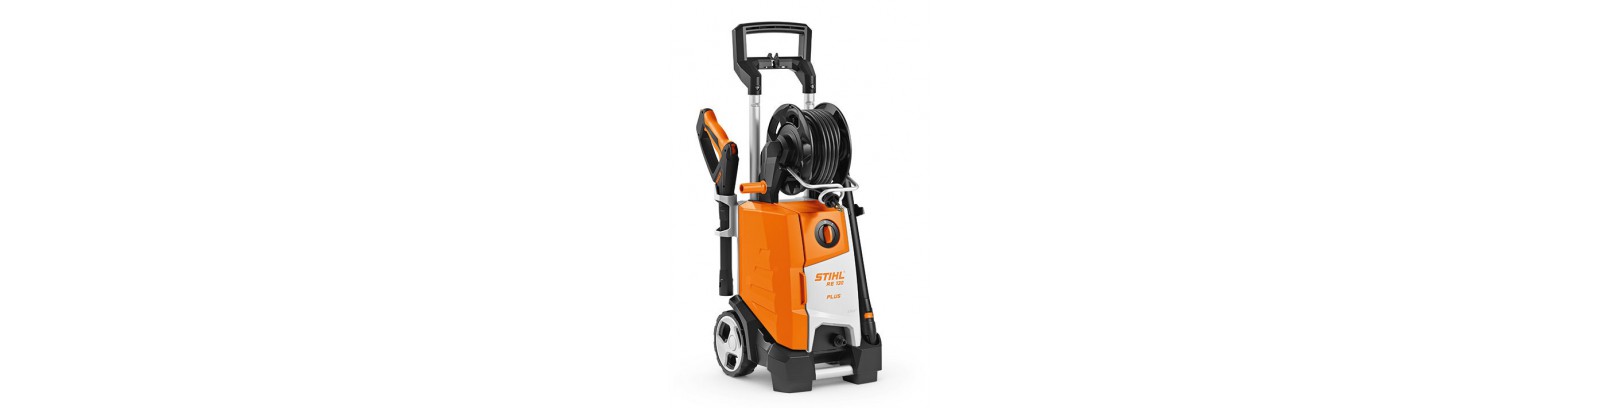 Electric Pressure Cleaners 